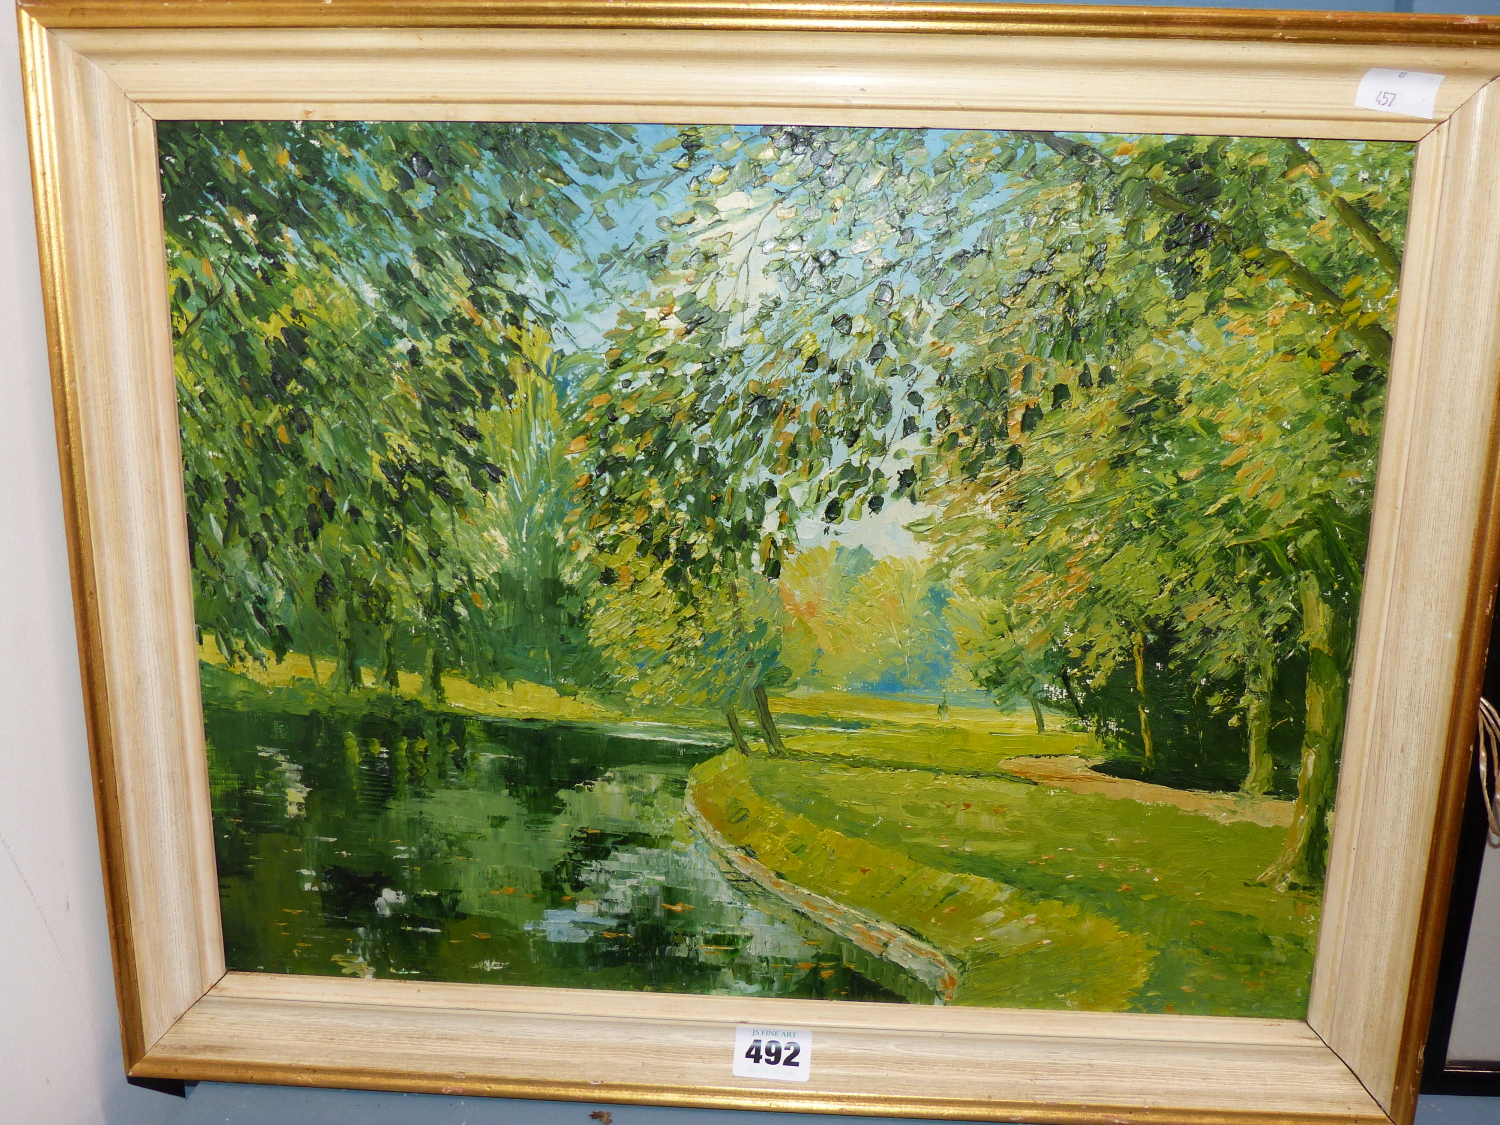 JOHN ATKINS (20TH CENTURY), THE CHERWELL AND CHRISTCHURCH MEADOWS, OIL ON BOARD, 44 x 34cms.